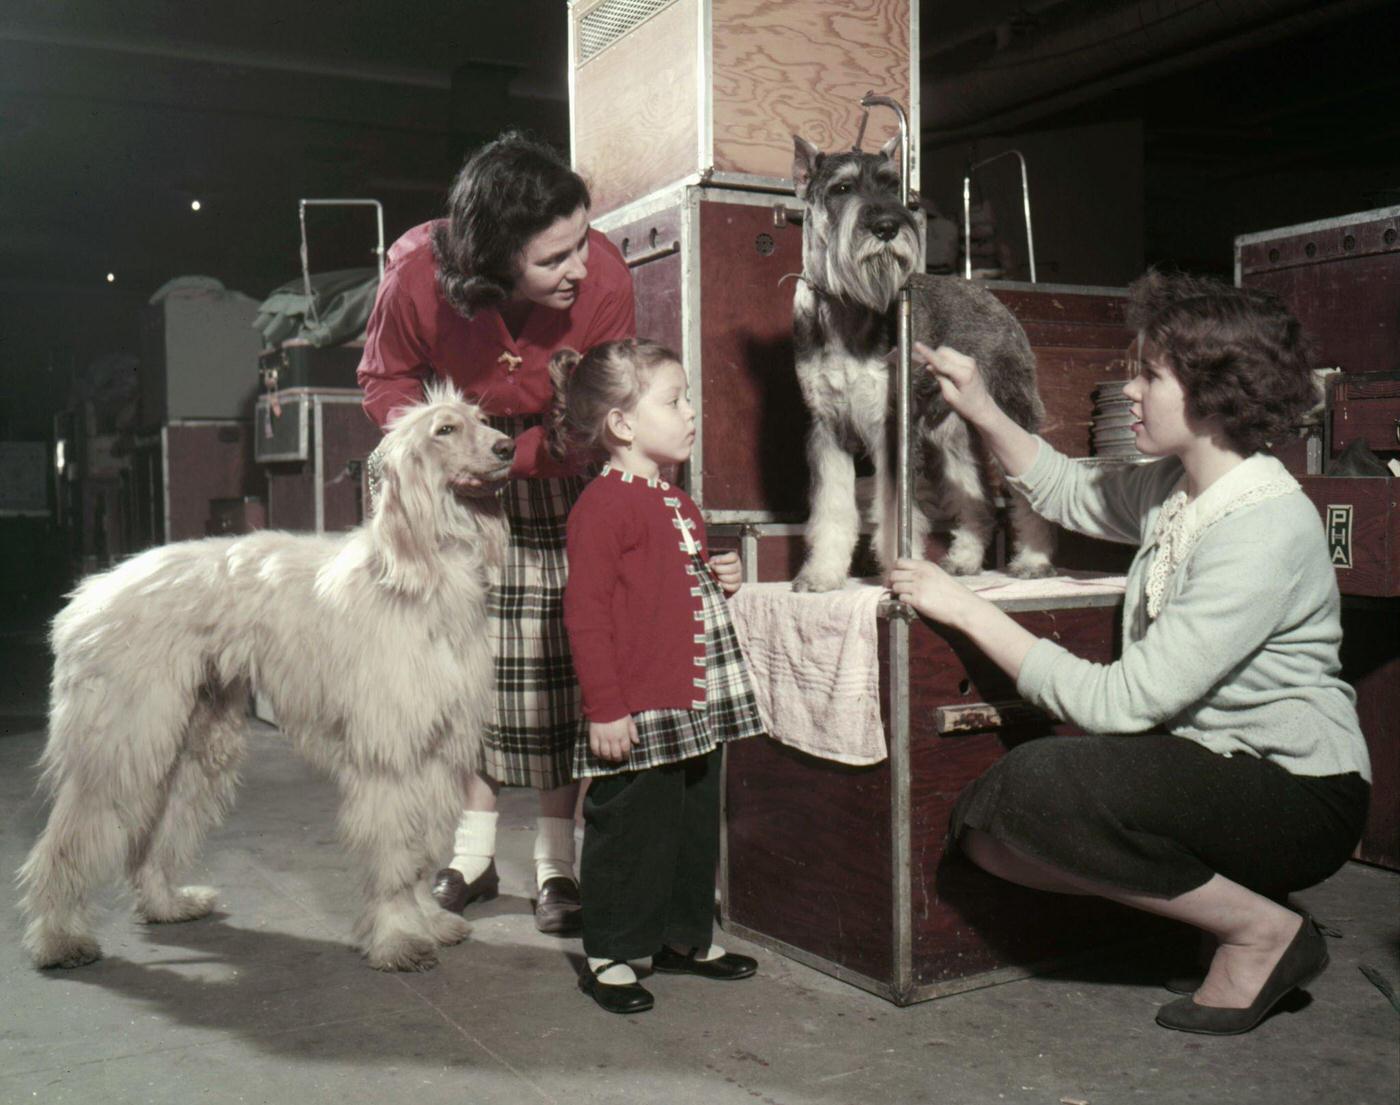 Owners Groom Their Dogs At Westminster Kennel Club Dog Show, Madison Square Garden, Manhattan, 1957.